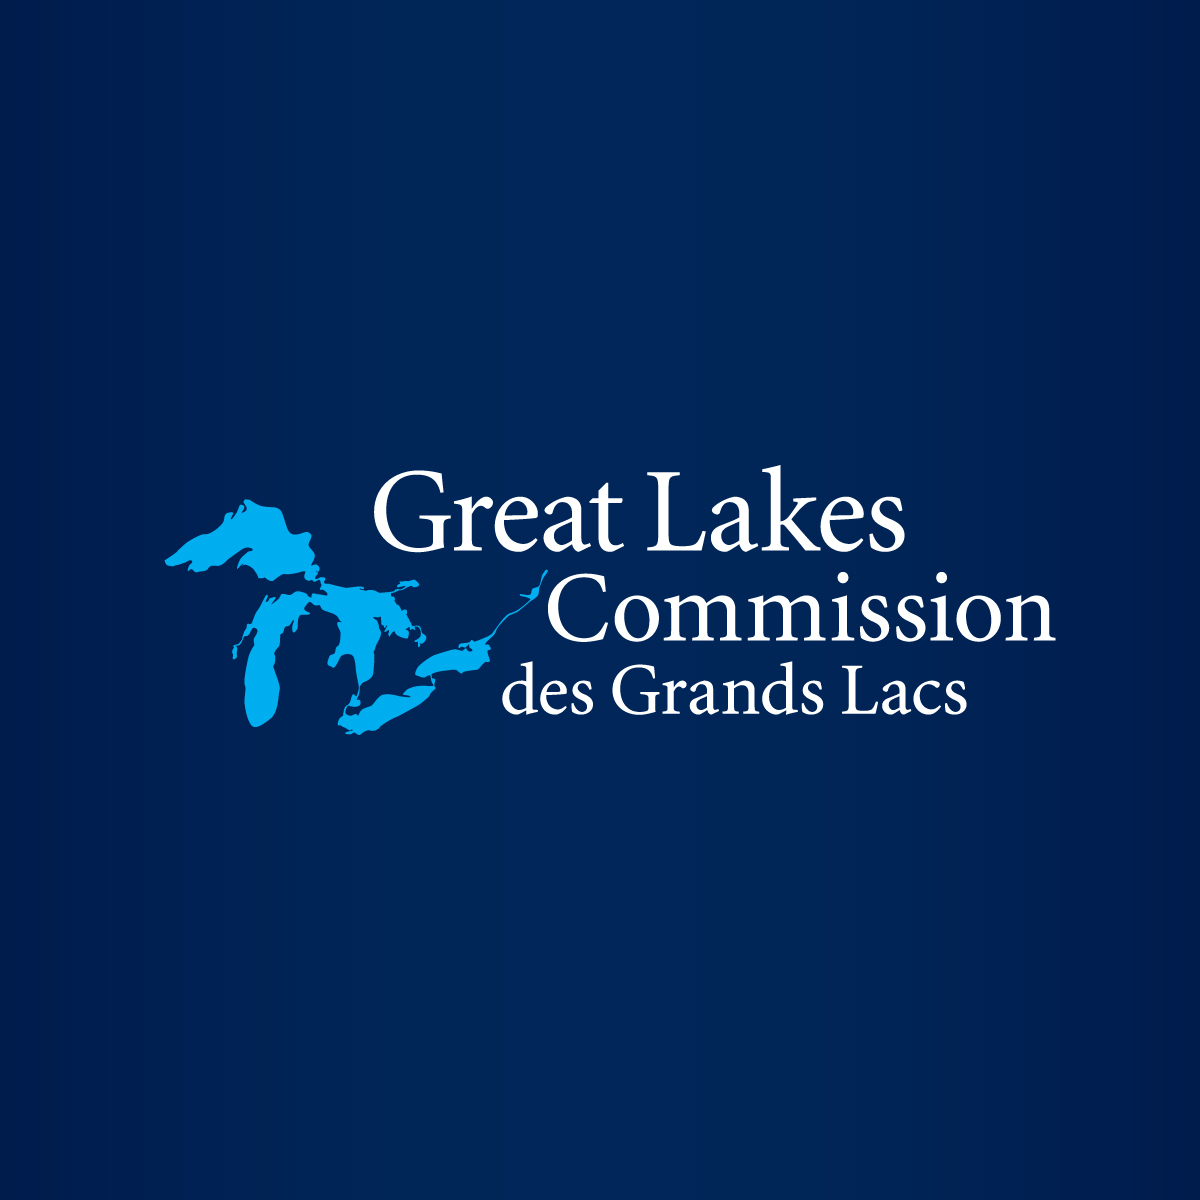 U.S. House approves Great Lakes Fish and Wildlife Restoration Act